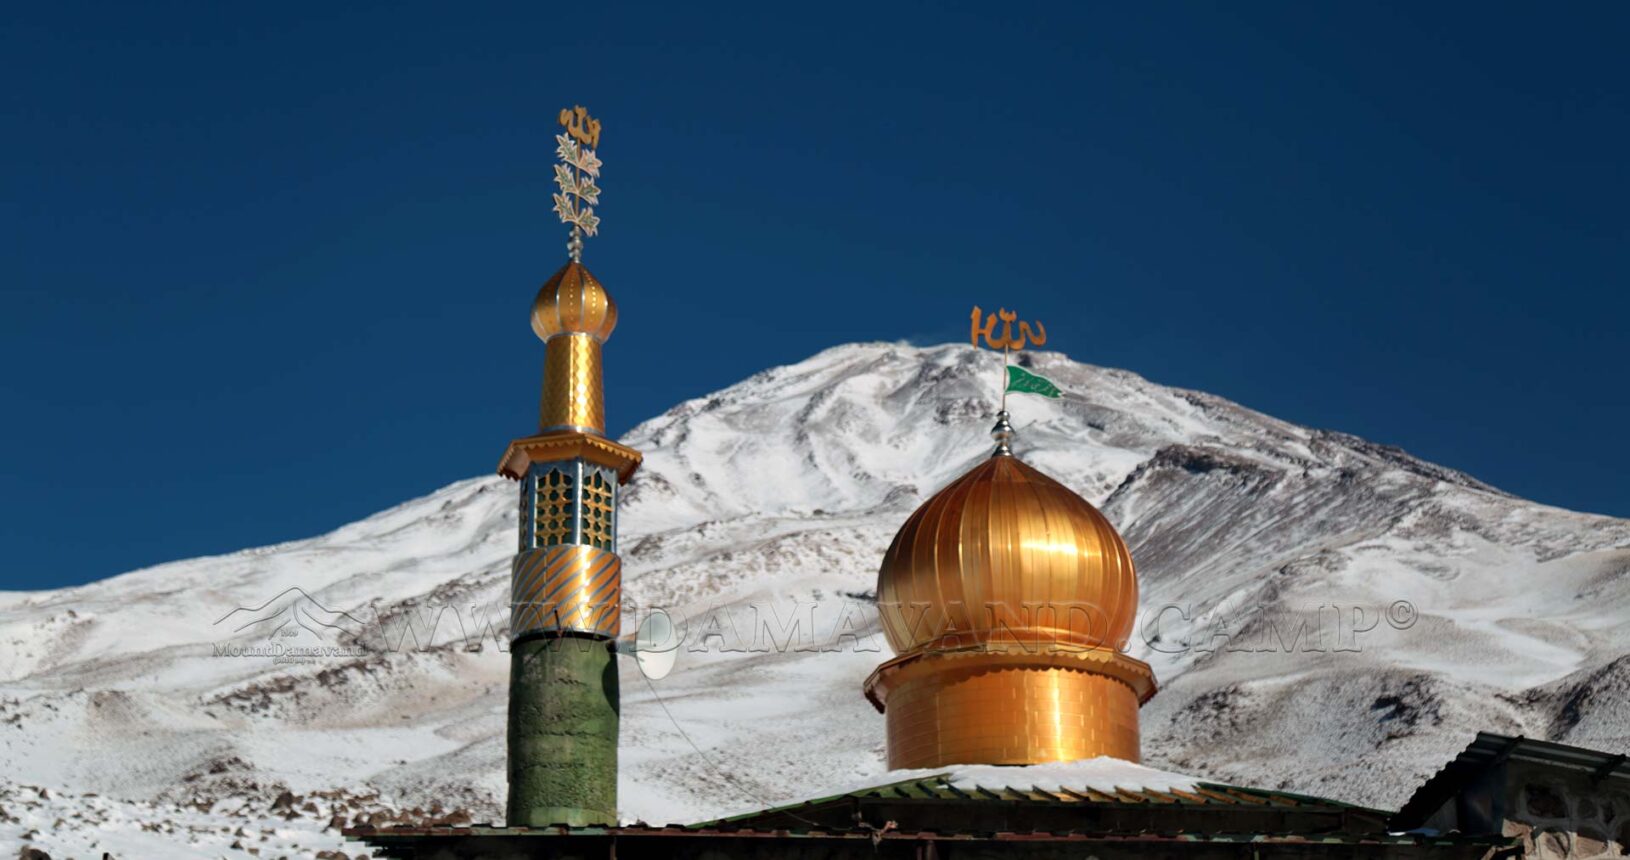 The snow covered Damavand behind the mosque at Camp II of Mount Damavand.